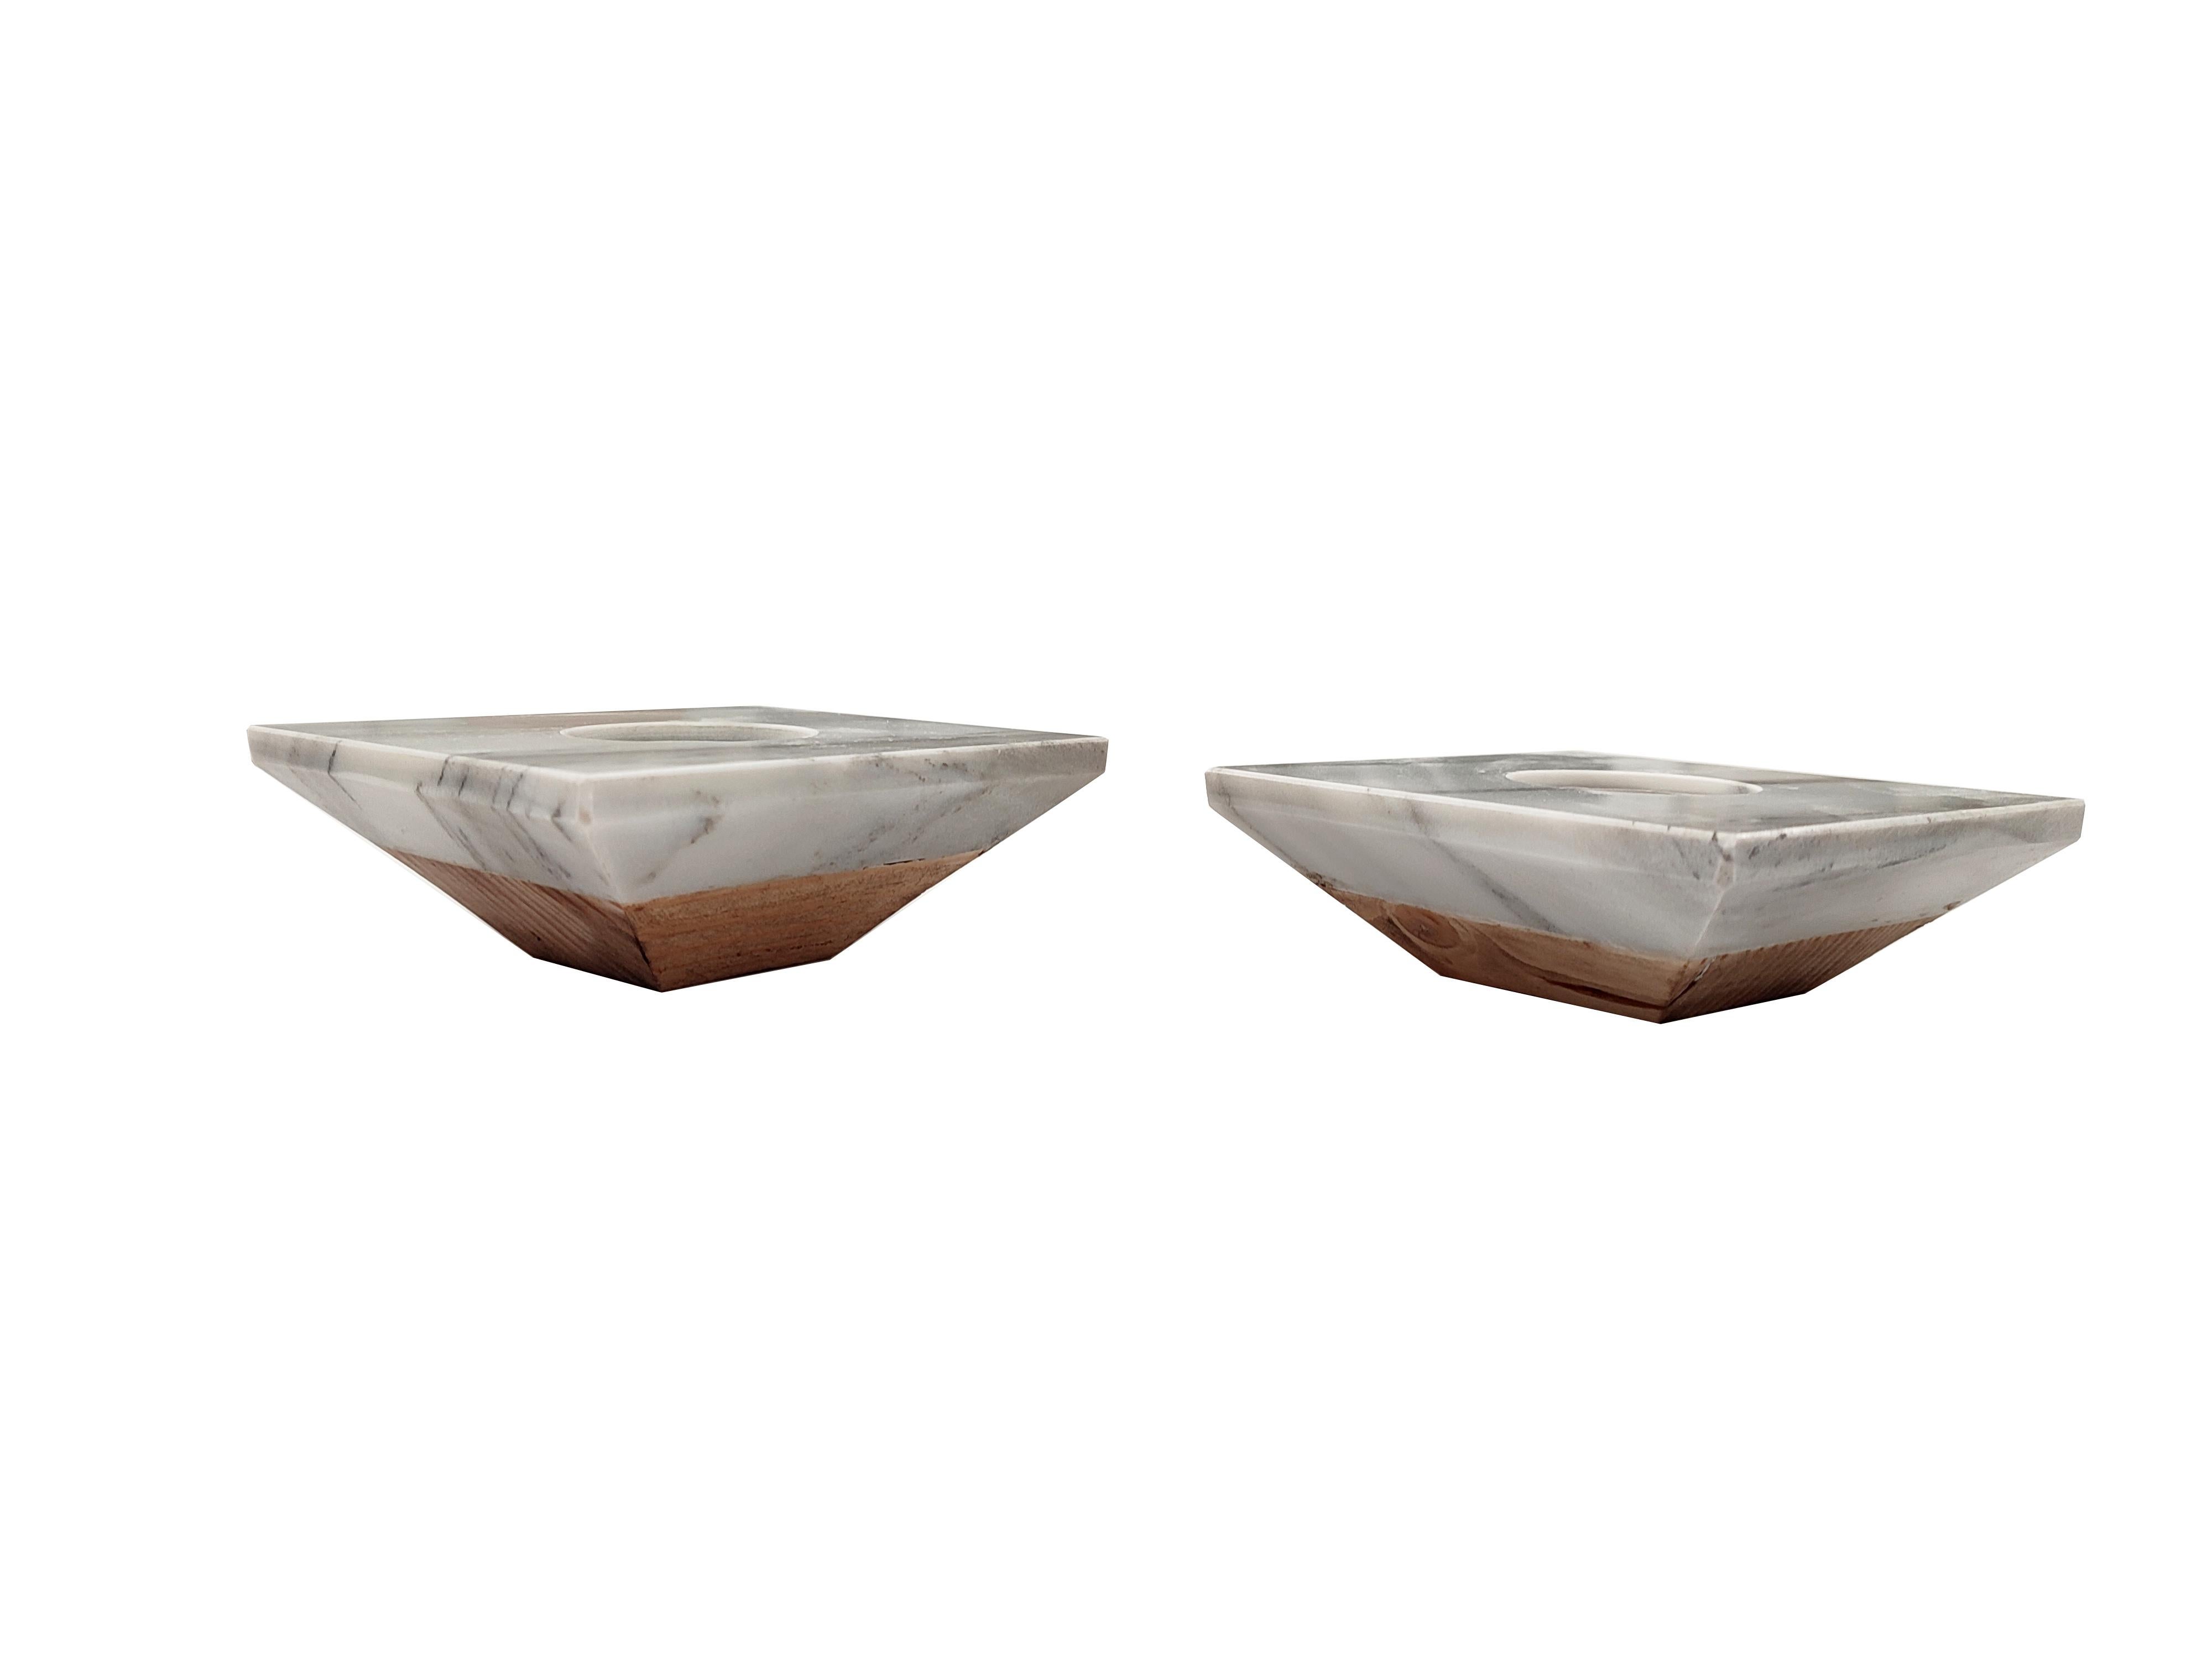 Set of Two Calacatta Italian Marble Candle Holders Contemporary Mother’s Day Gift Spain.
Set of two candle holders in marble elegant and contemporary design. A pair of candle holders with a modern design made of marble and wood. The structure of the